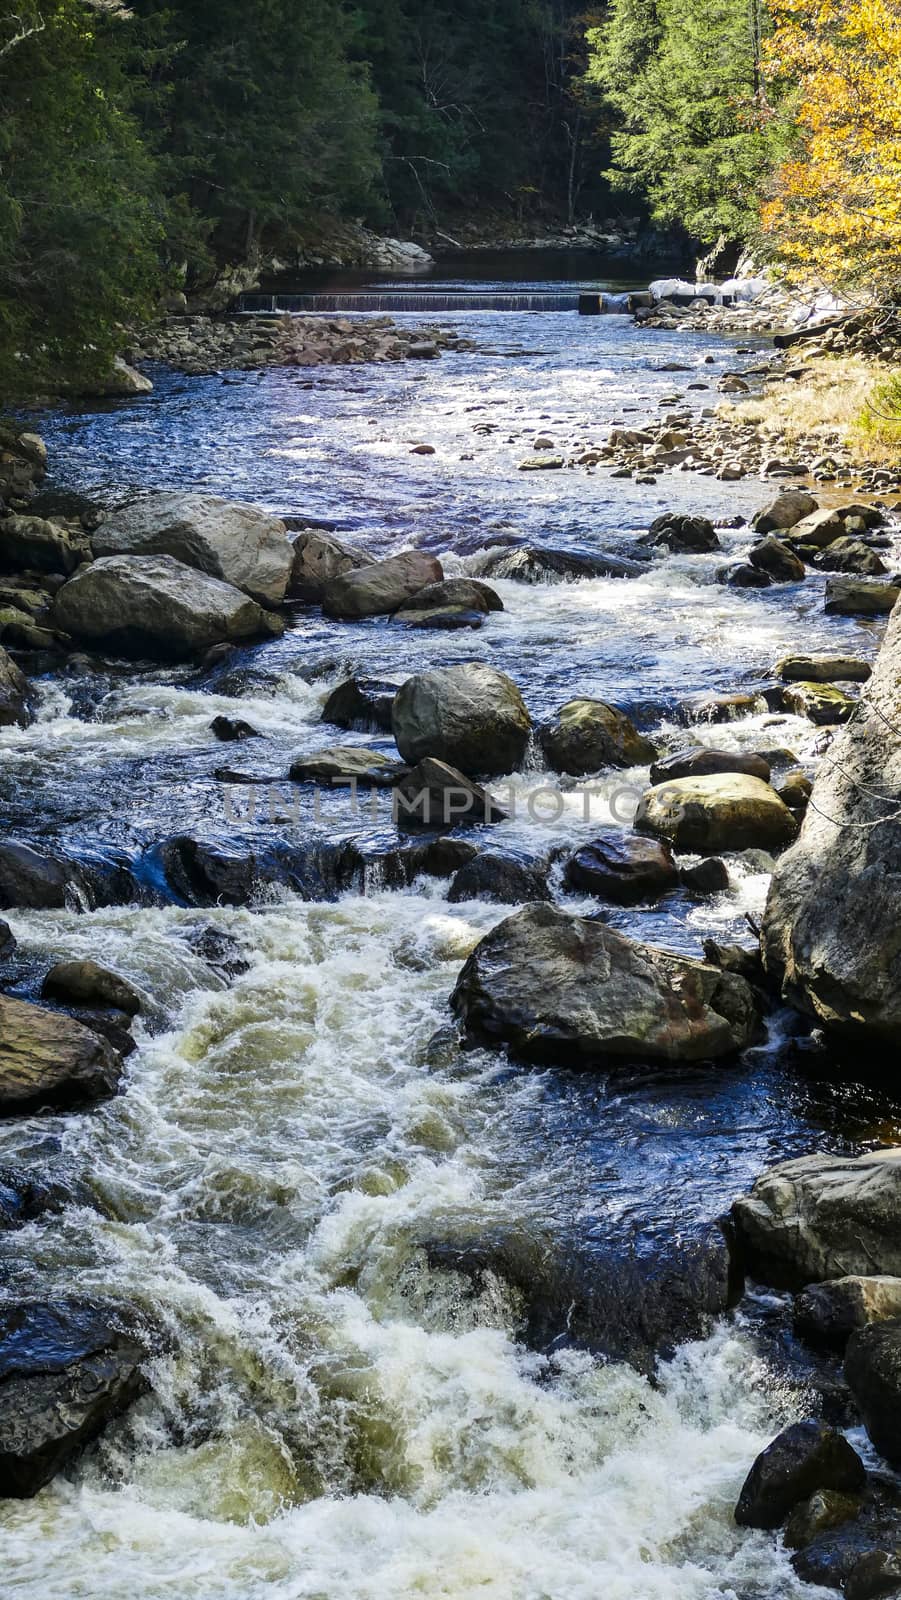 Running Creek Through Rocks and Stones Causing White Water on a Sunny Autumn Day